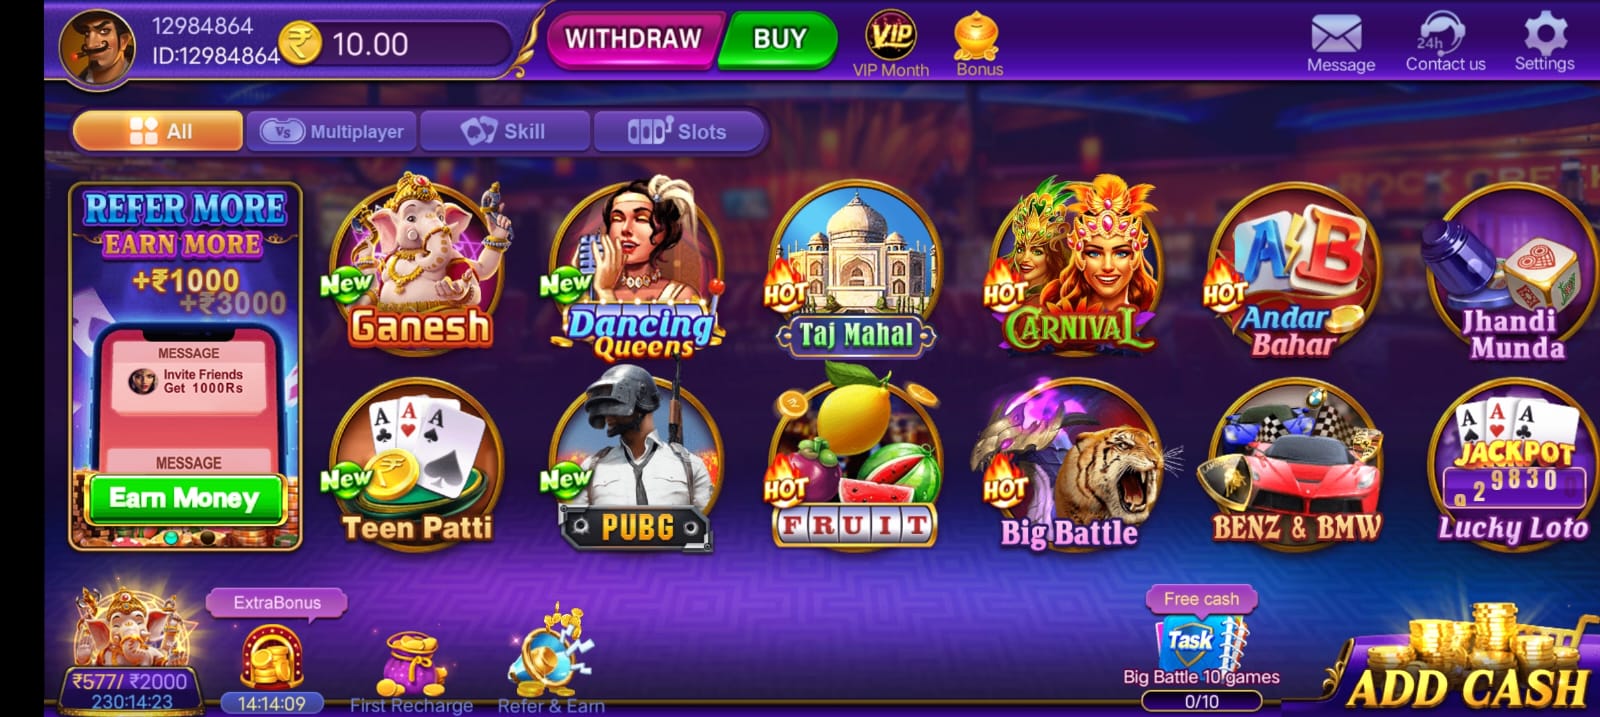 Available Games on Royal Slots VIP Month In Royal Slots Apk,slots,royal slots,royal slots game,free slots casino,royal slots ios game,royal slots gameplay,royal slots ios gameplay,royal slots playthrough,high limit slots,casino royale,bc slots,royal slots android gameplay,royal reels slot machine,casino jackpot slots,free slots,vegas slots,slots big win,casino slots,lady luck slots,slots machines,royal slots free slot machines & casino games,professor slots,real money slots app,slots app for real money,octro teenpatti new trick 2024ðŸ¥±,new teen patti game,teen patti new app today,octro teenpatti new update 2023,octro teenpatti new update,new teen patti 2023,teenpatti split screen game play 2024,new teen patti,octro teenpatti free chips,new teen patti app 2023,new teen patti app,new teen patti apps,new rummy application 2024,new app teen patti,teen patti new app,teen patti octro new trick 202,teen patti master 2024,new teen patti 51 bonus